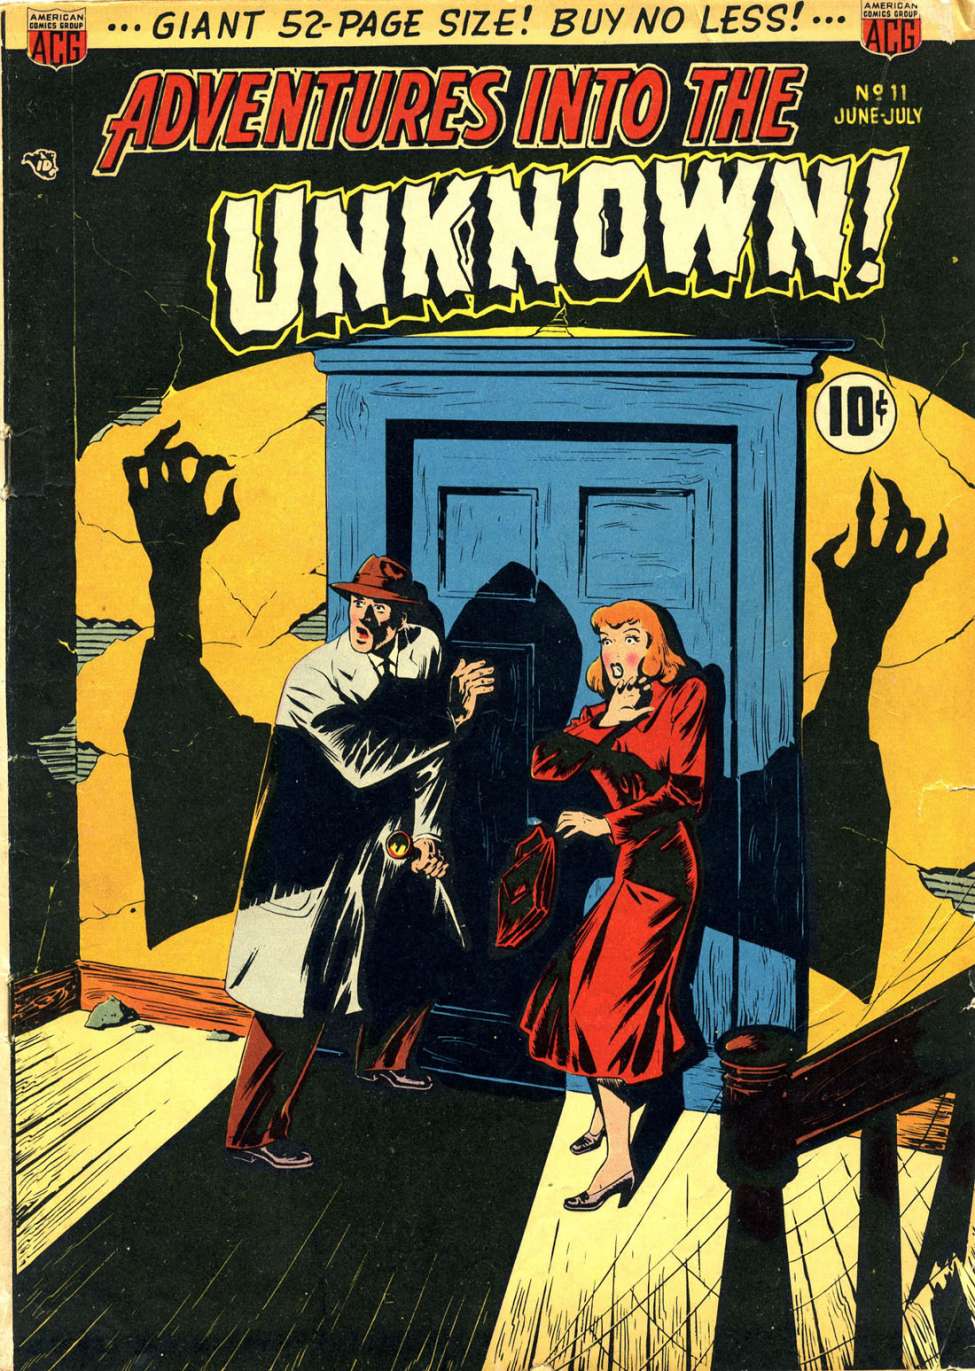 Comic Book Cover For Adventures into the Unknown 11